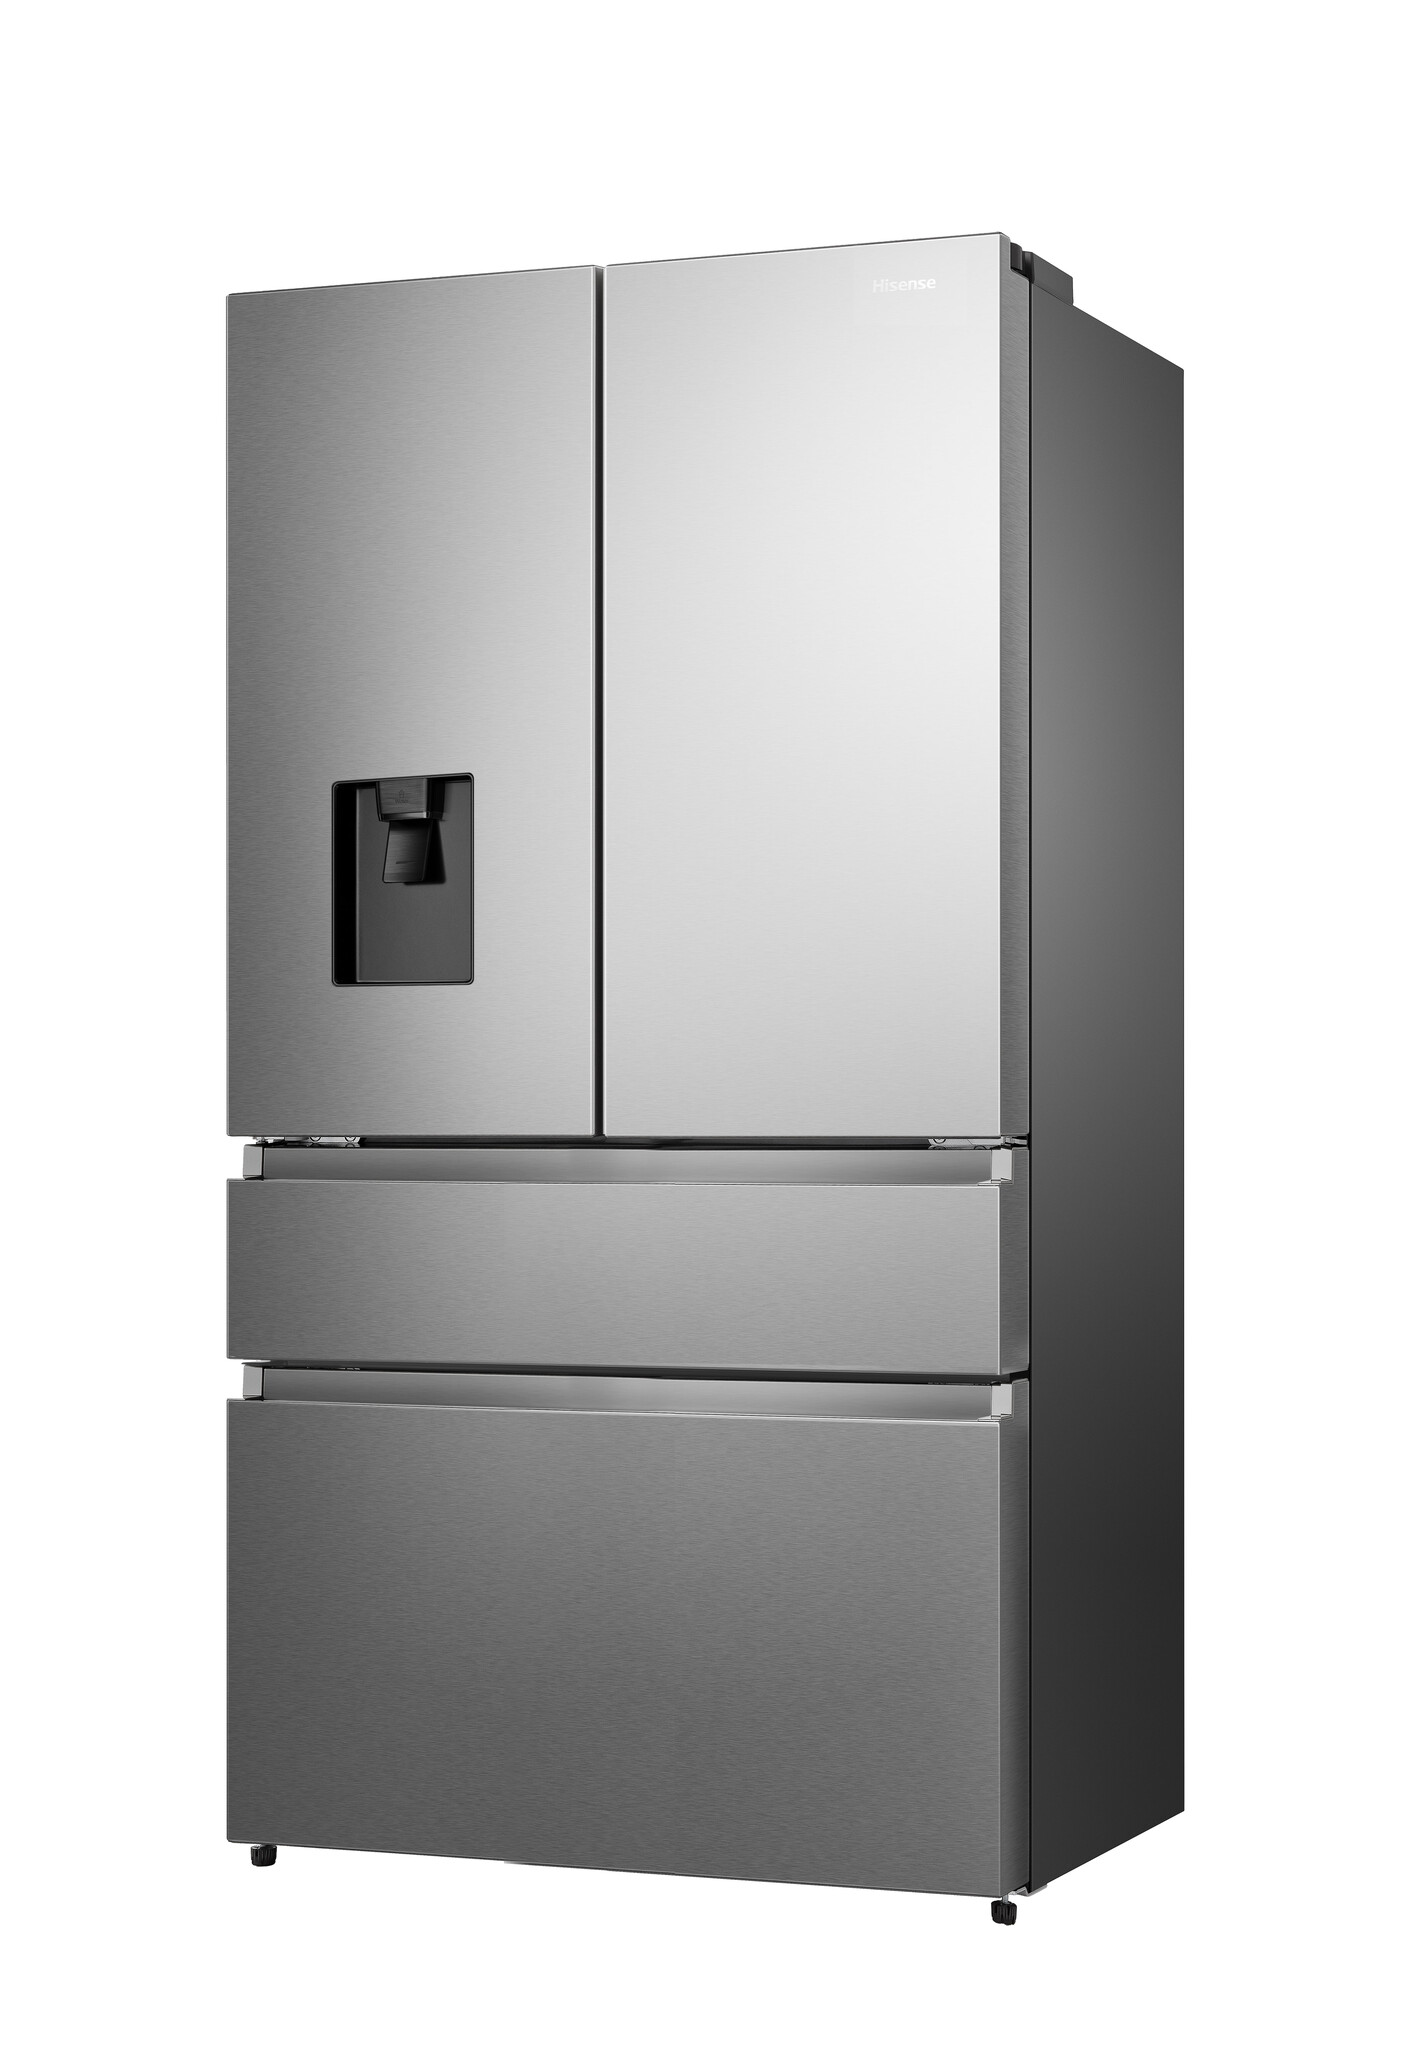 Hisense PureFlat RF749N4SWSE Non-Plumbed Total No Frost American Fridge Freezer – Stainless Steel – E Rated #367303